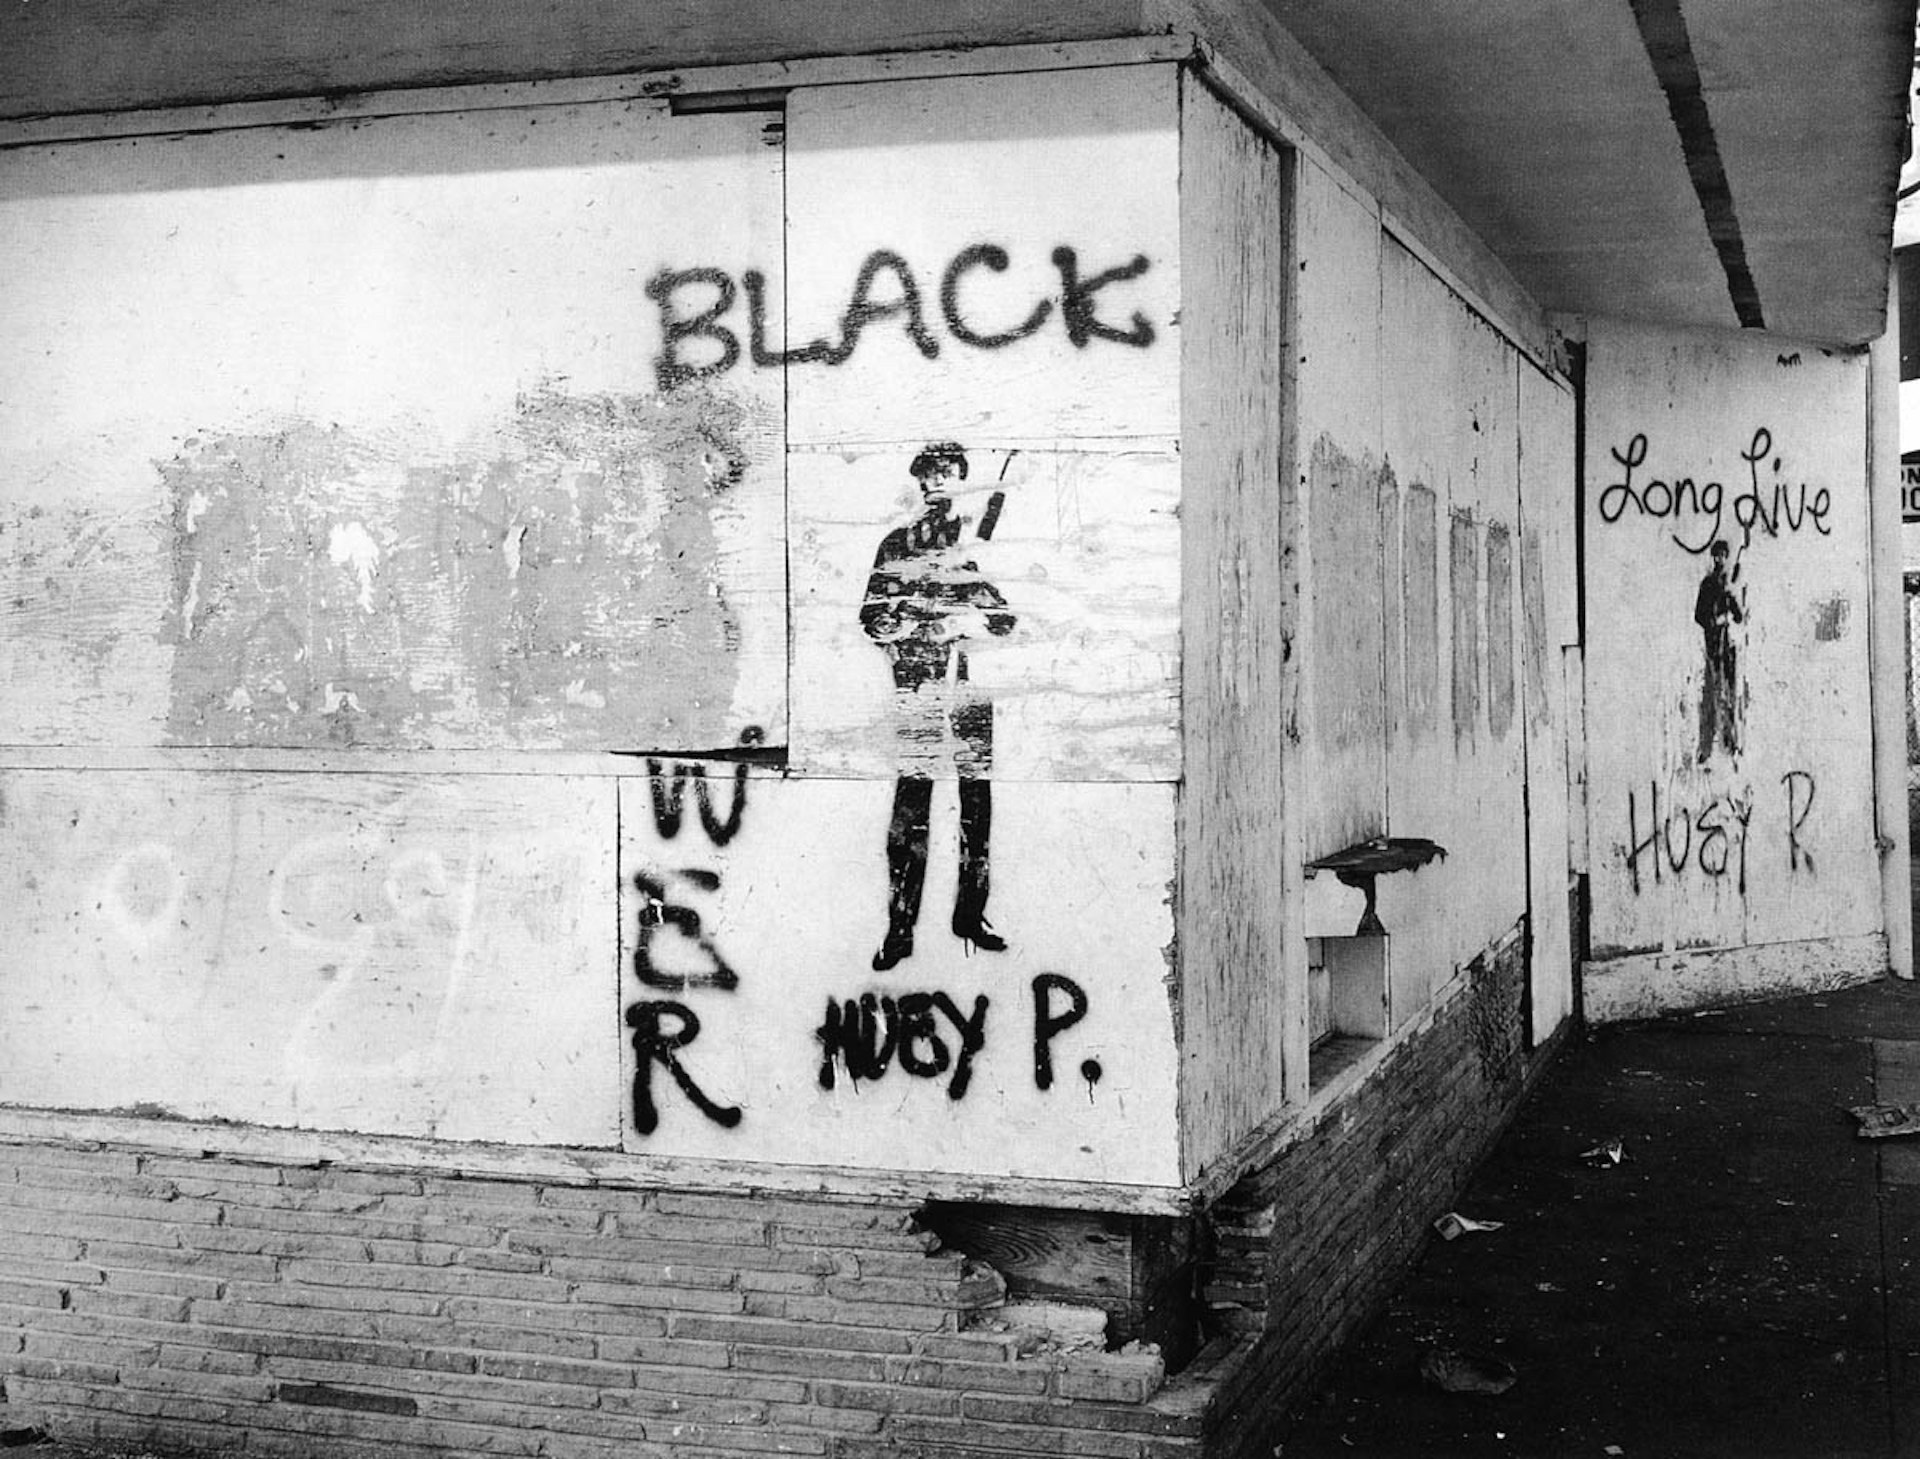 Lewis Watts, Graffiti, West Oakland, 1993, courtesy of the photographer, from "All Power: Visual Legacies of the Black Panther Party," PCNW 2018